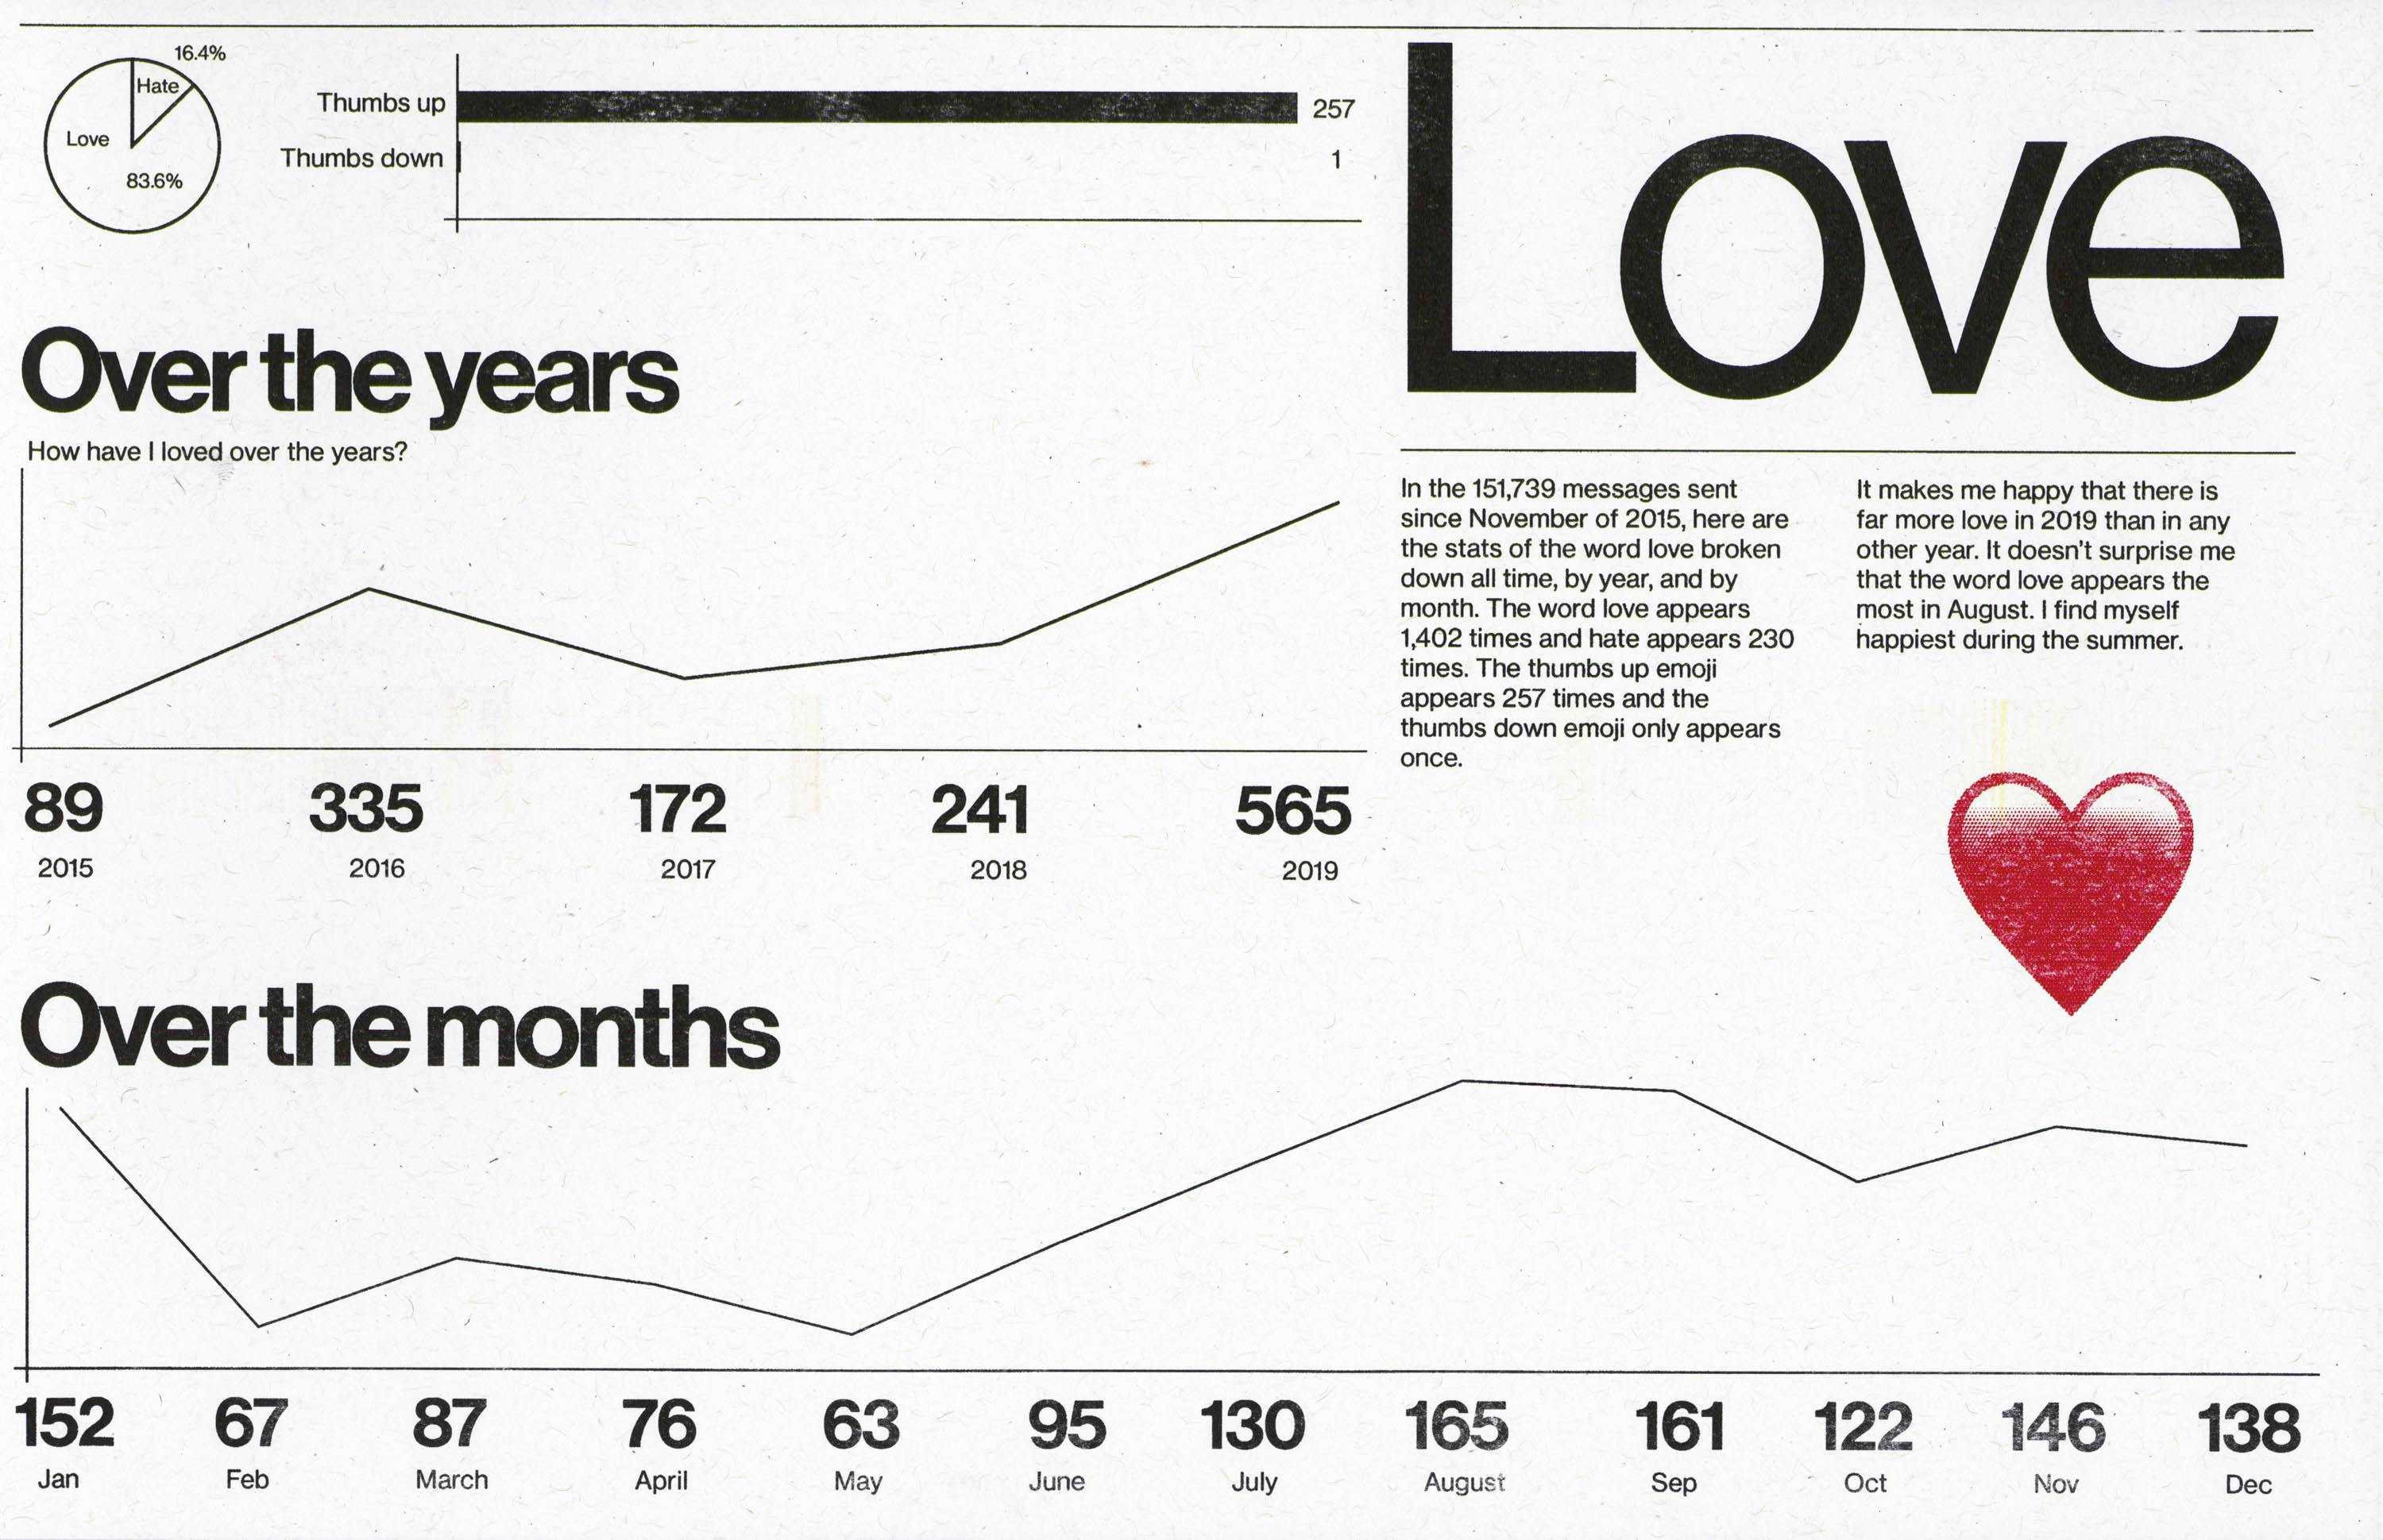 Graph titled "Love" detailing sentiment over the years and months. Indicates love sentiment peaking in 2019 with a heart image. Includes a narrative about the sender’s emotions and a monthly graph.